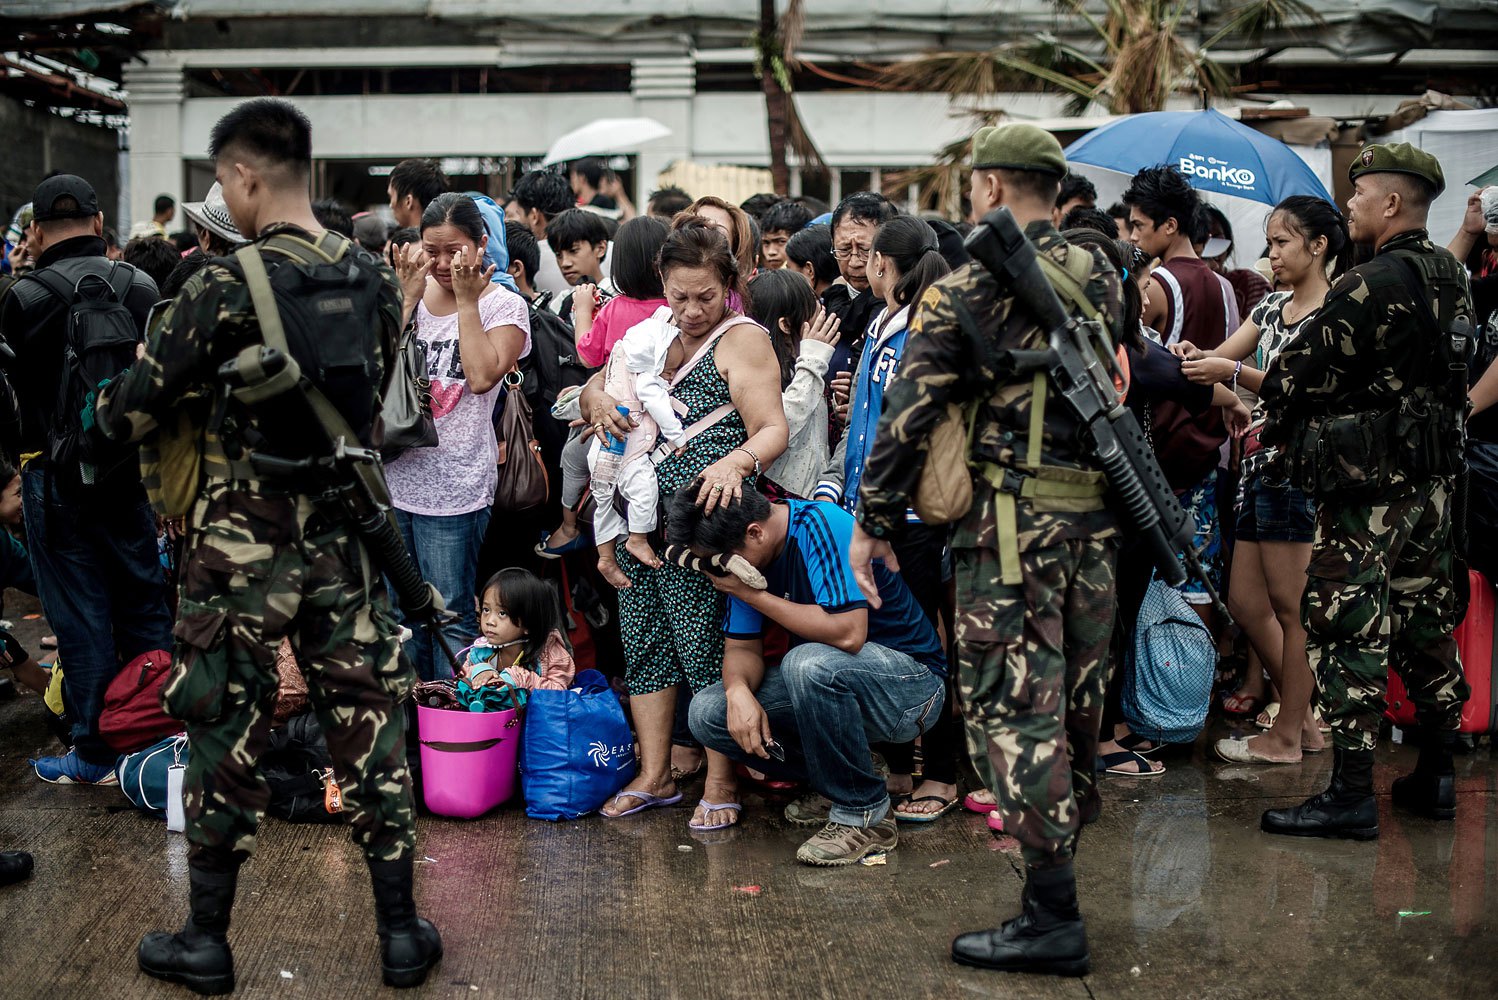 A woman holding a baby comforts a crying relative as a plane leaves the airport during evacuation operations in Tacloban, on the eastern island of Leyte on November 12, 2013 after Super Typhoon Haiyan swept over the Philippines.